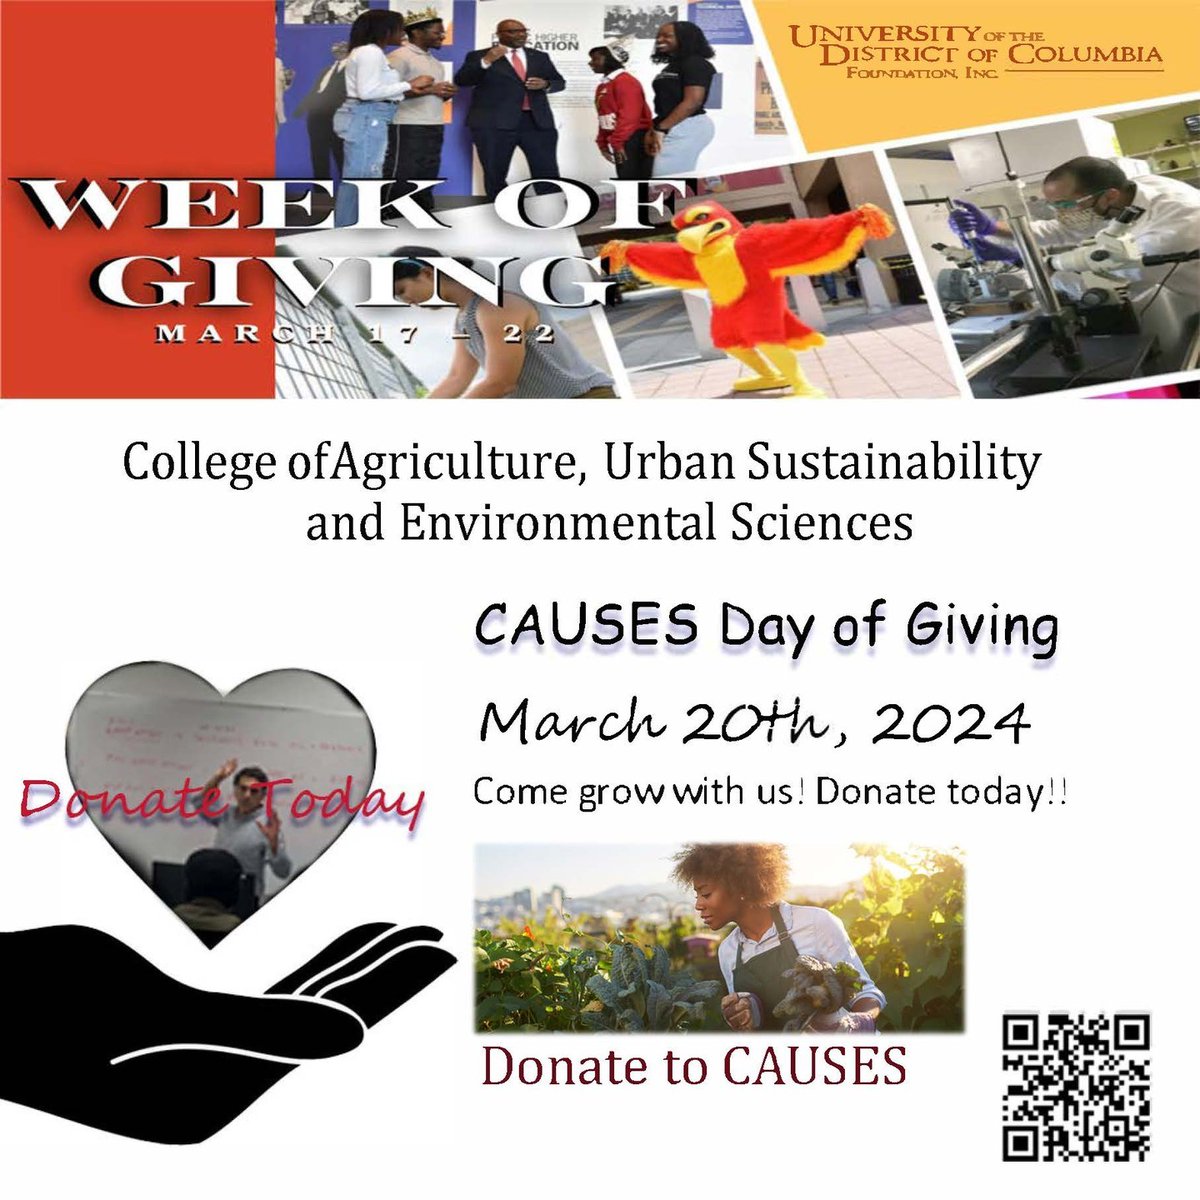 Support UDC during the 2024 Week of Giving! Today we focus on the College of Agriculture, Urban Sustainability and Enviromental Sciences (@udc_causes), which embodies the land-grant tradition of UDC.